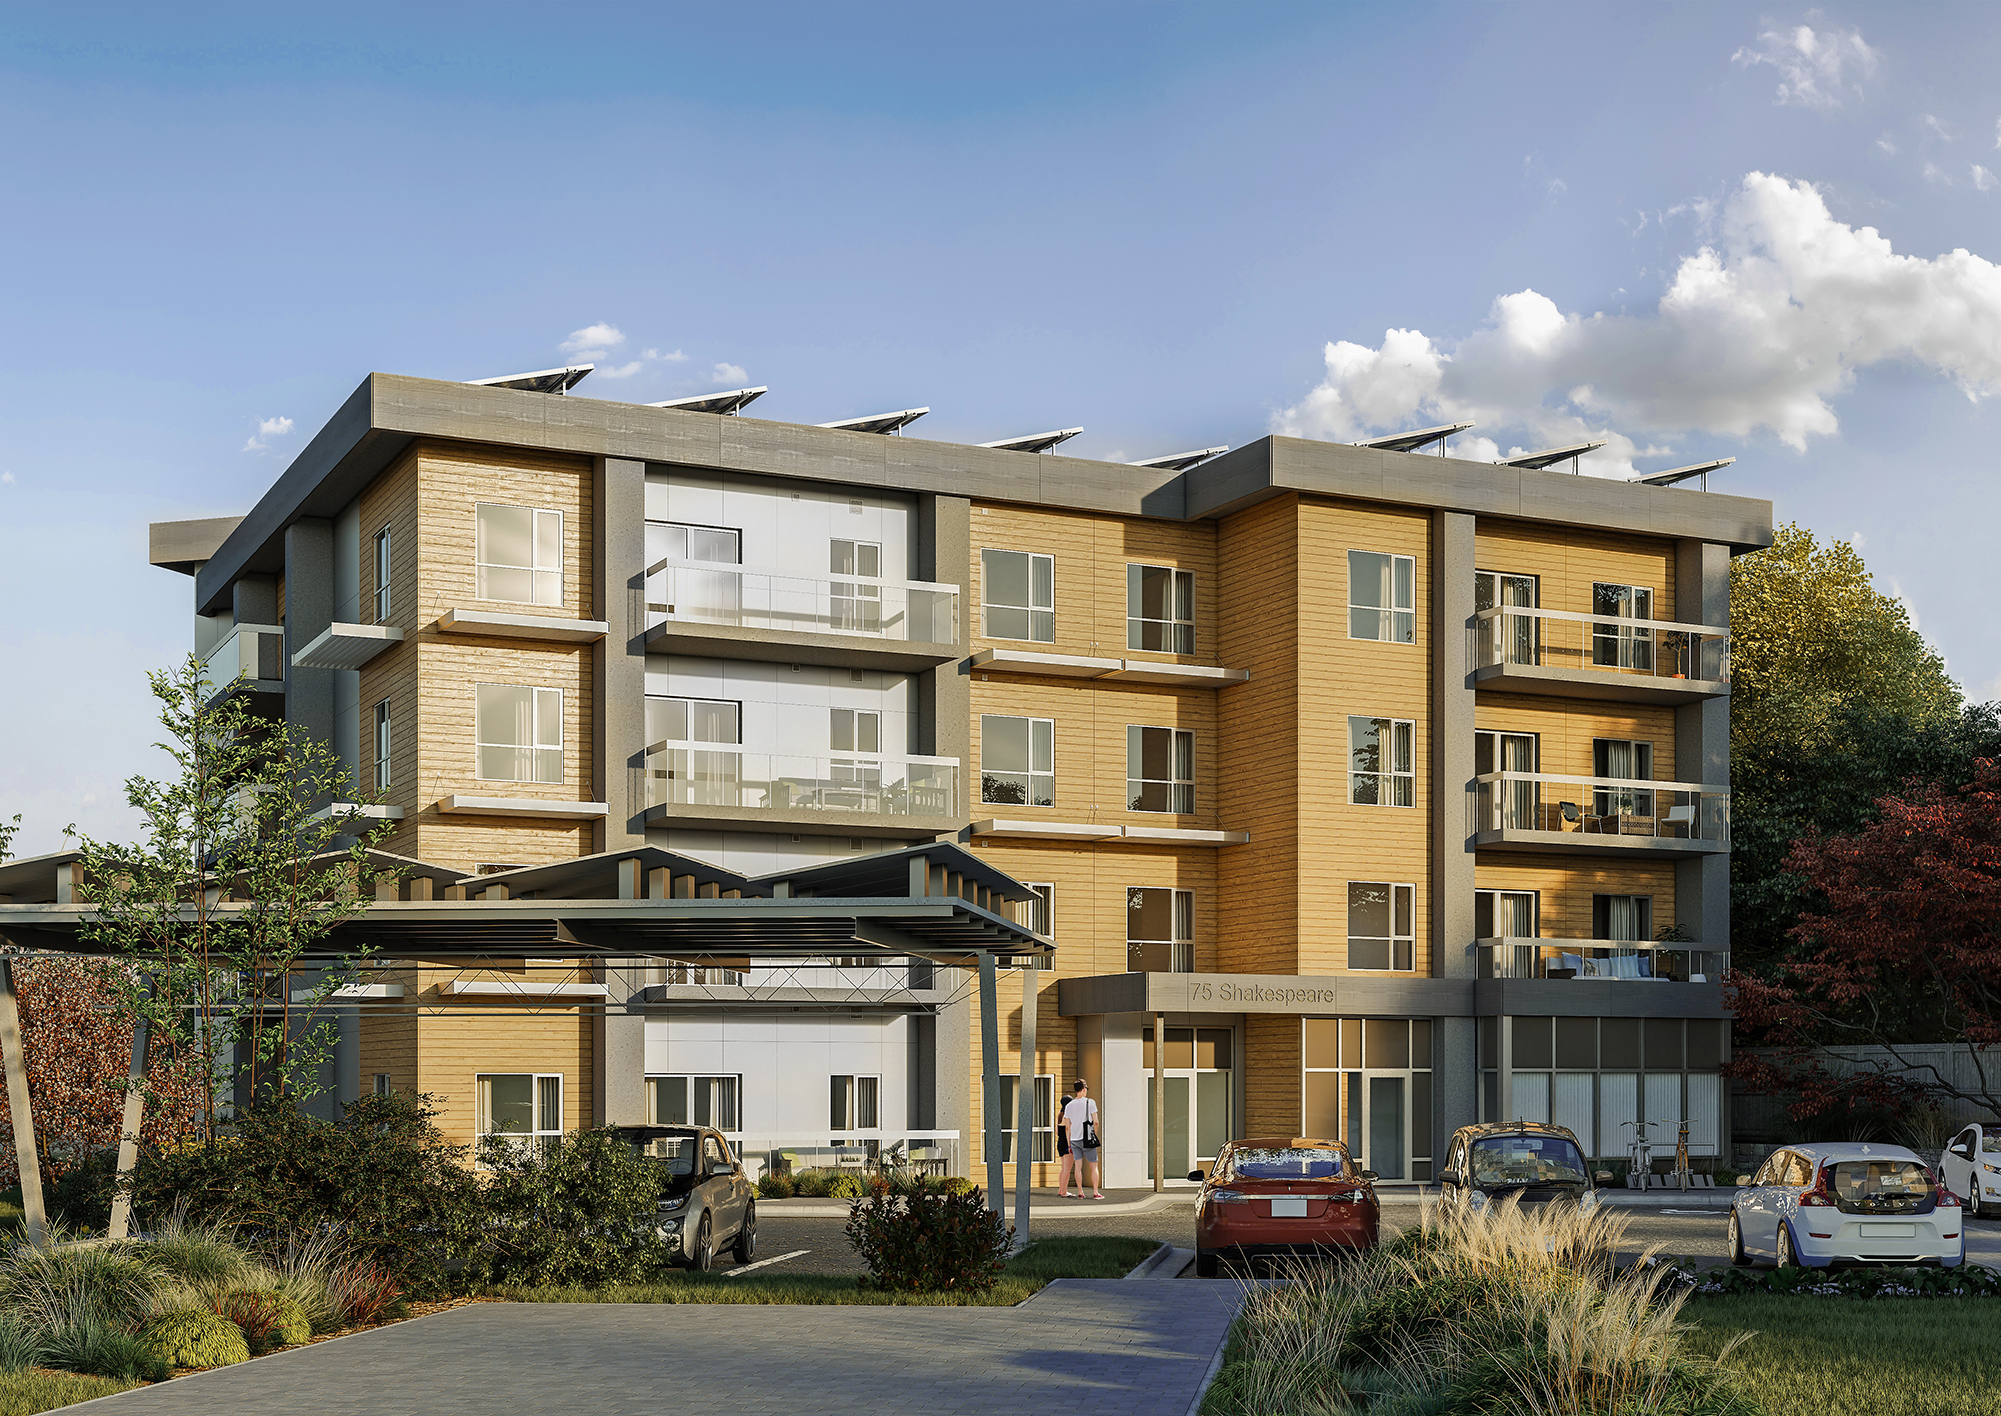 Terra Condos located at 75 Shakespeare Drive, Guelph, ON image